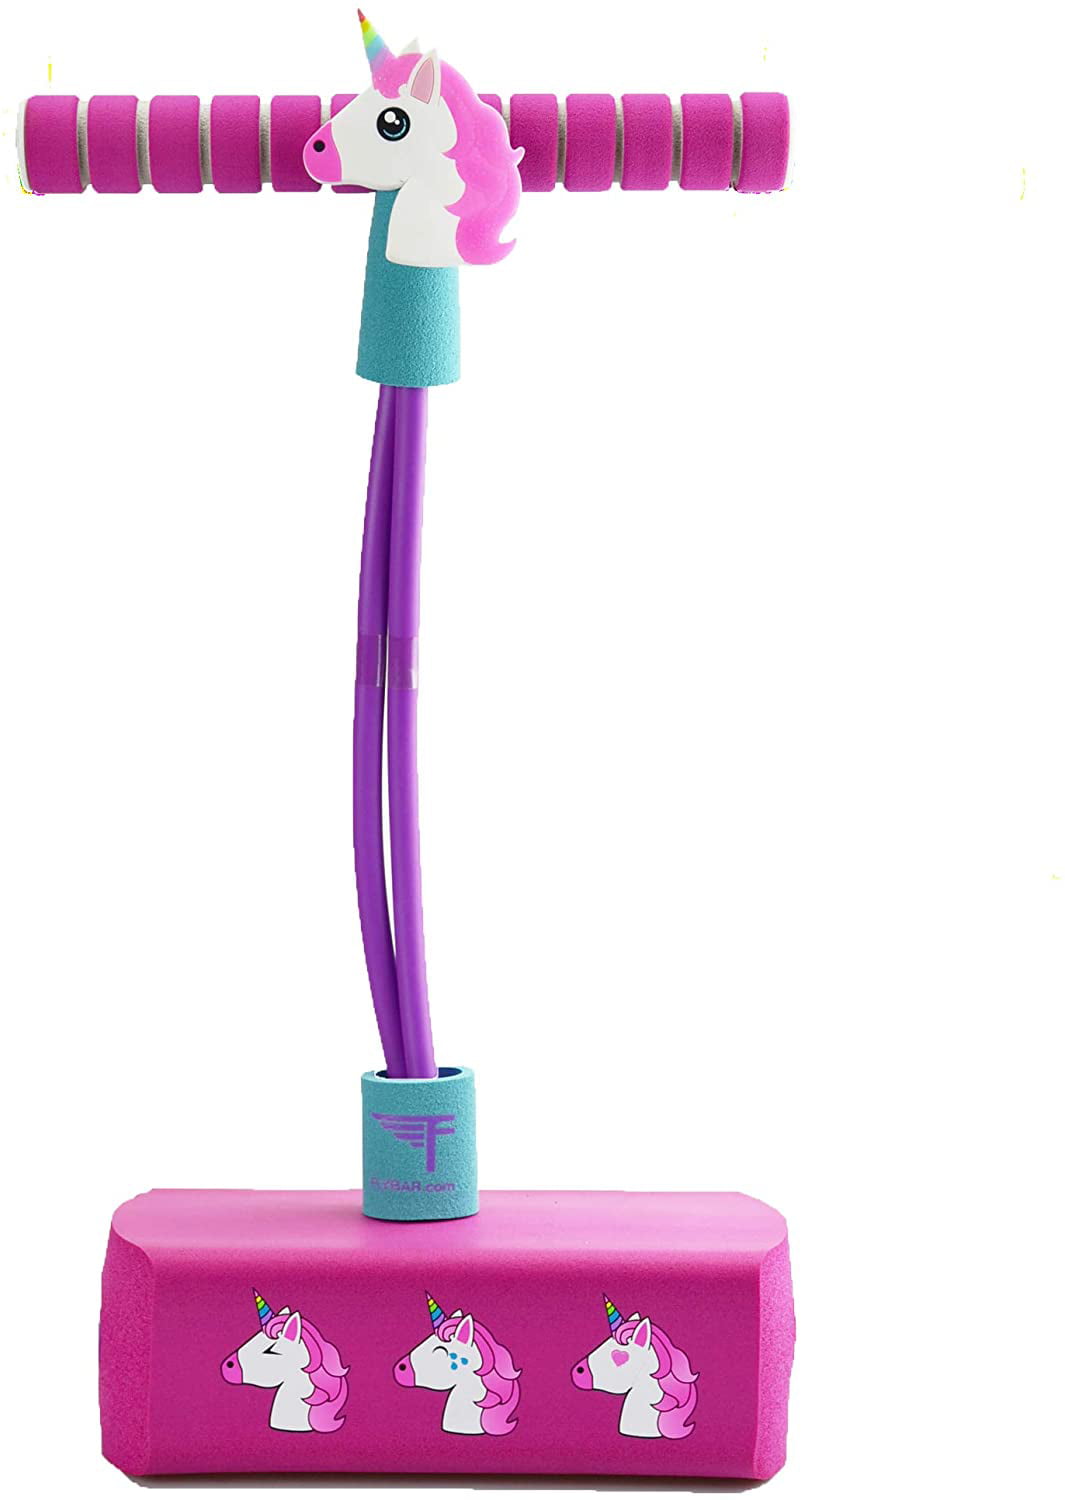 My First Flybar Unicorn Foam Pogo Pals Hopper Ursula Squeaks Supports 250lbs for sale online 